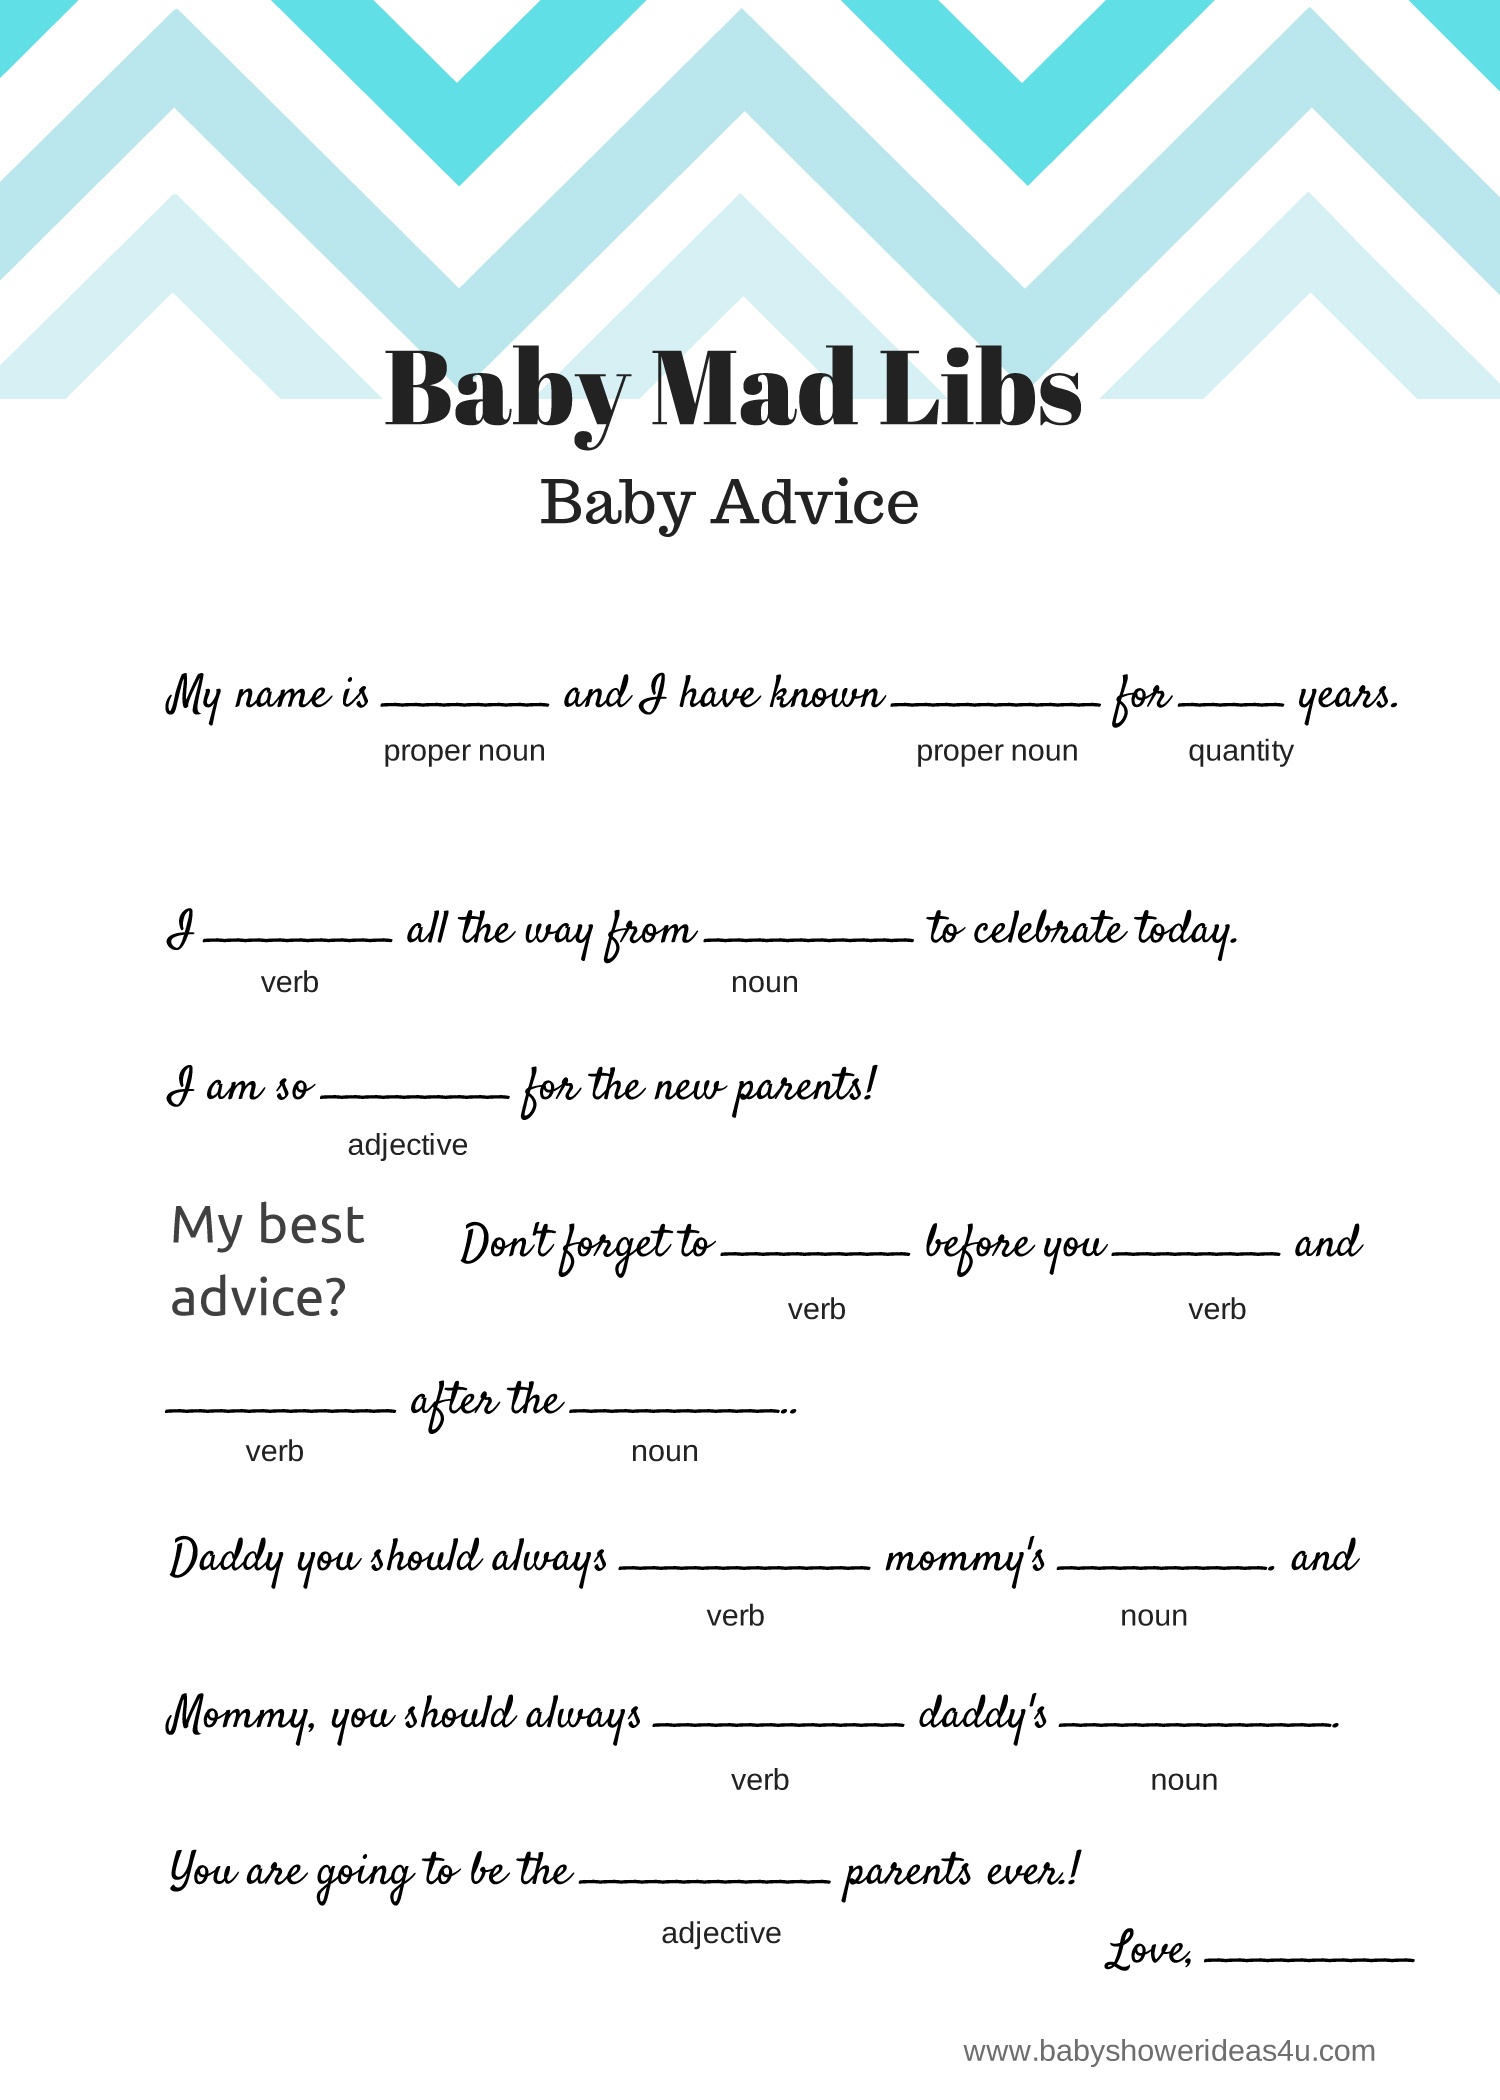 Free Baby Mad Libs Game - Baby Advice - Baby Shower Ideas - Themes - Free Printable Baby Shower Games For Twins